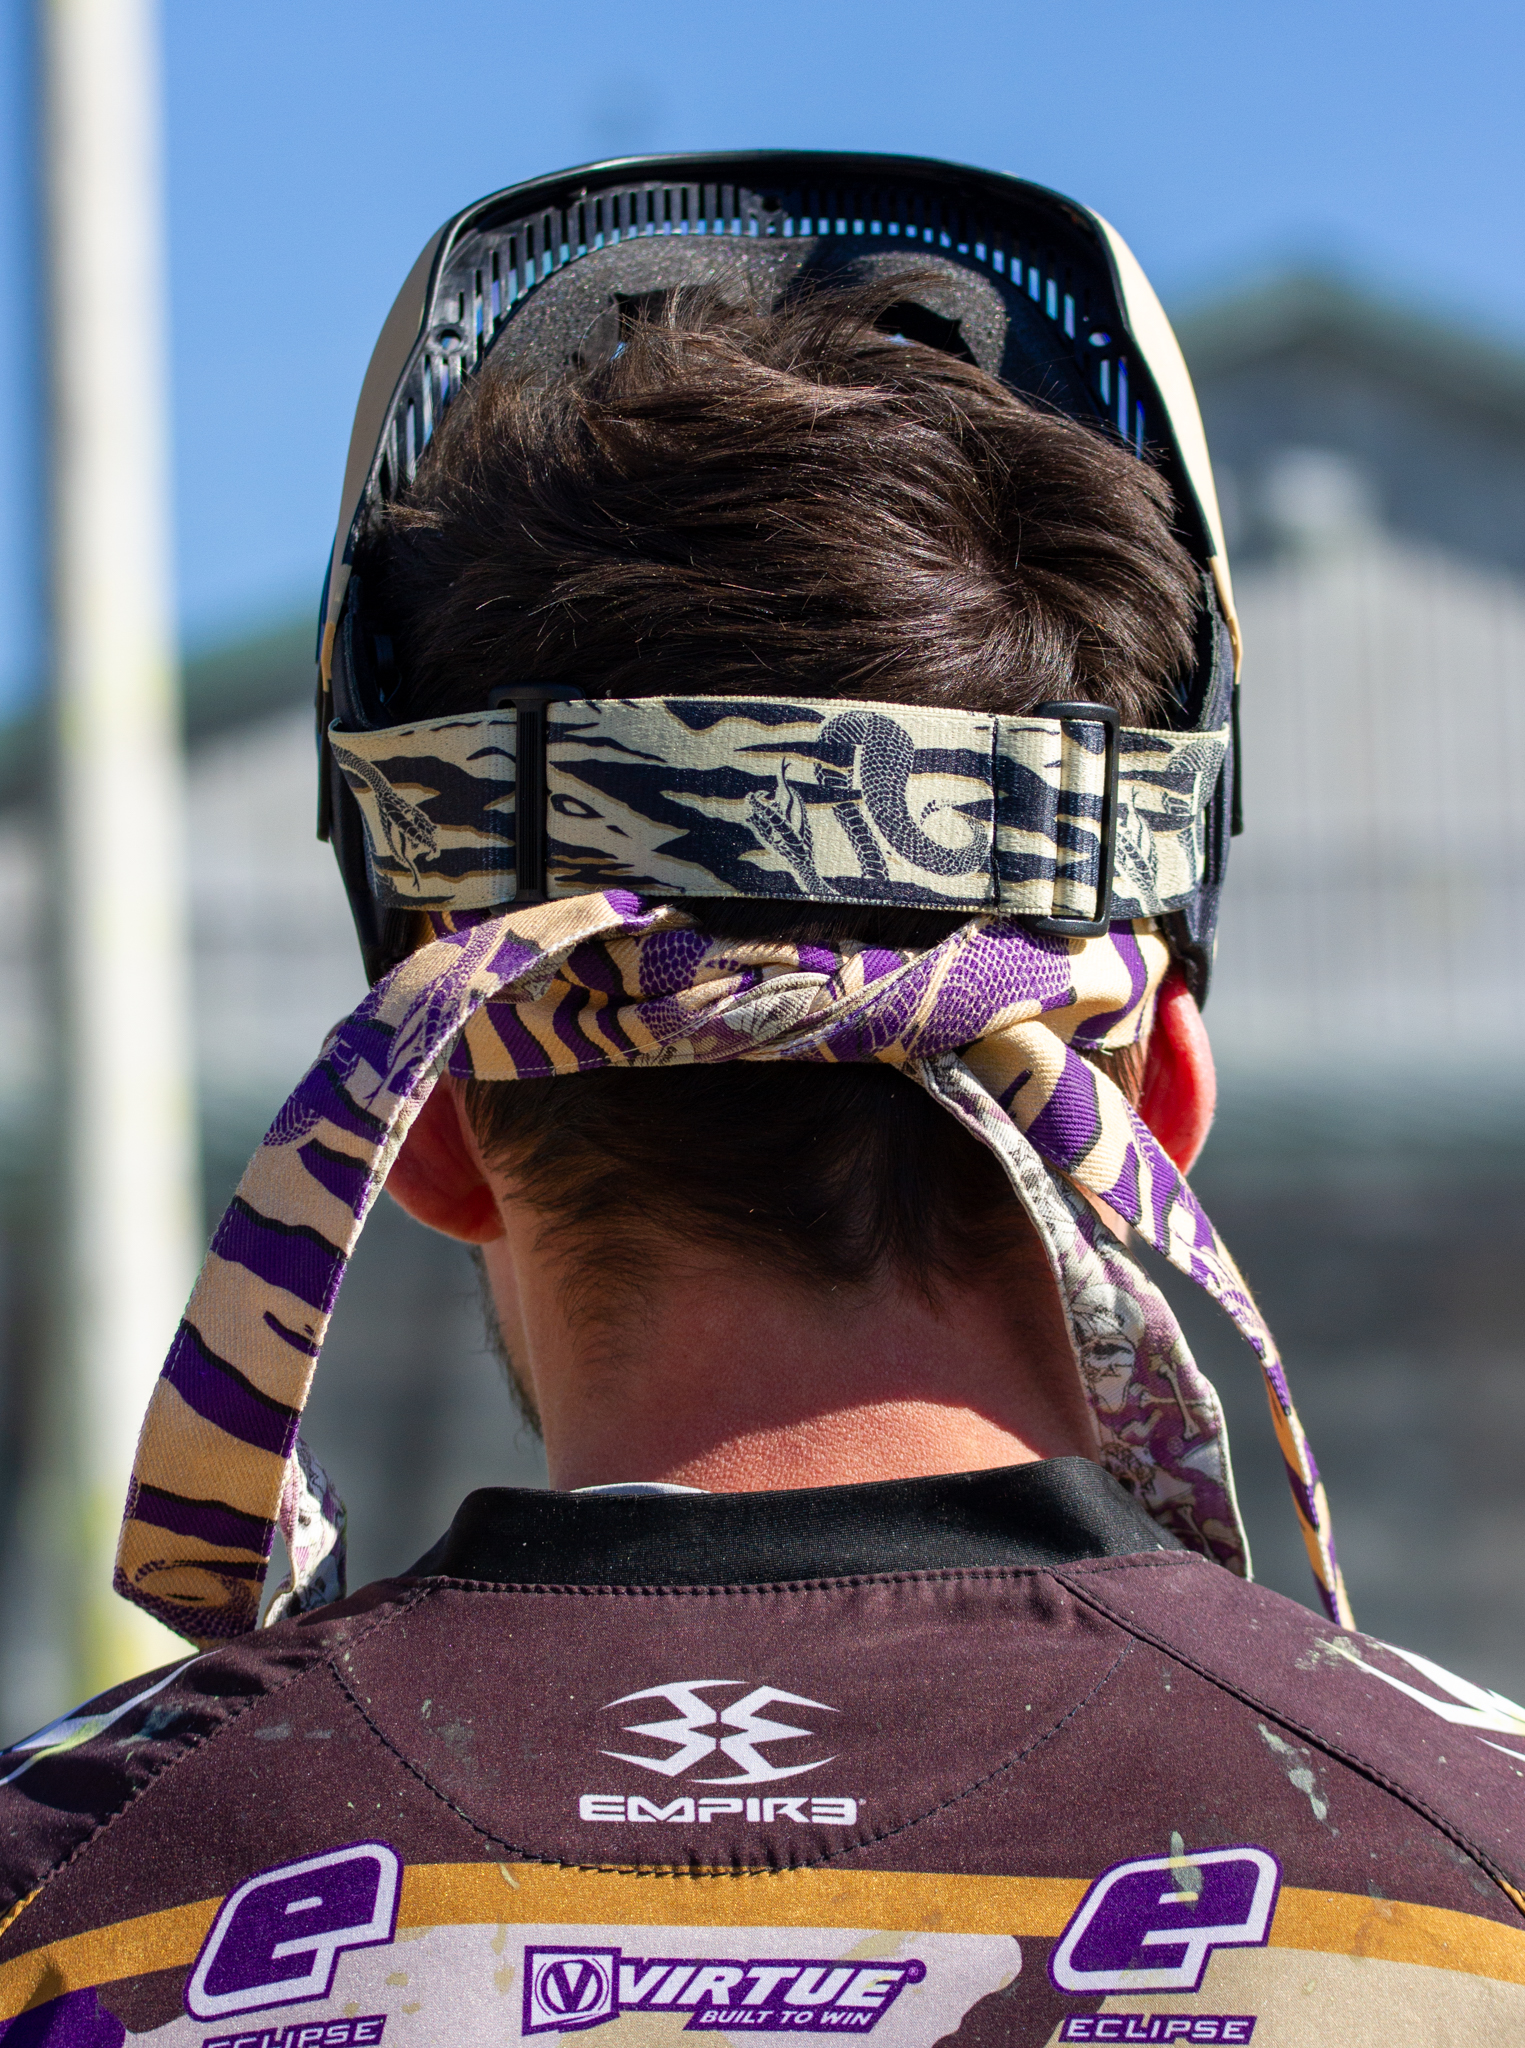 Baltimore Revo Grill 2.0 Mask - 1 of 25 Snakestripe Exclusive 